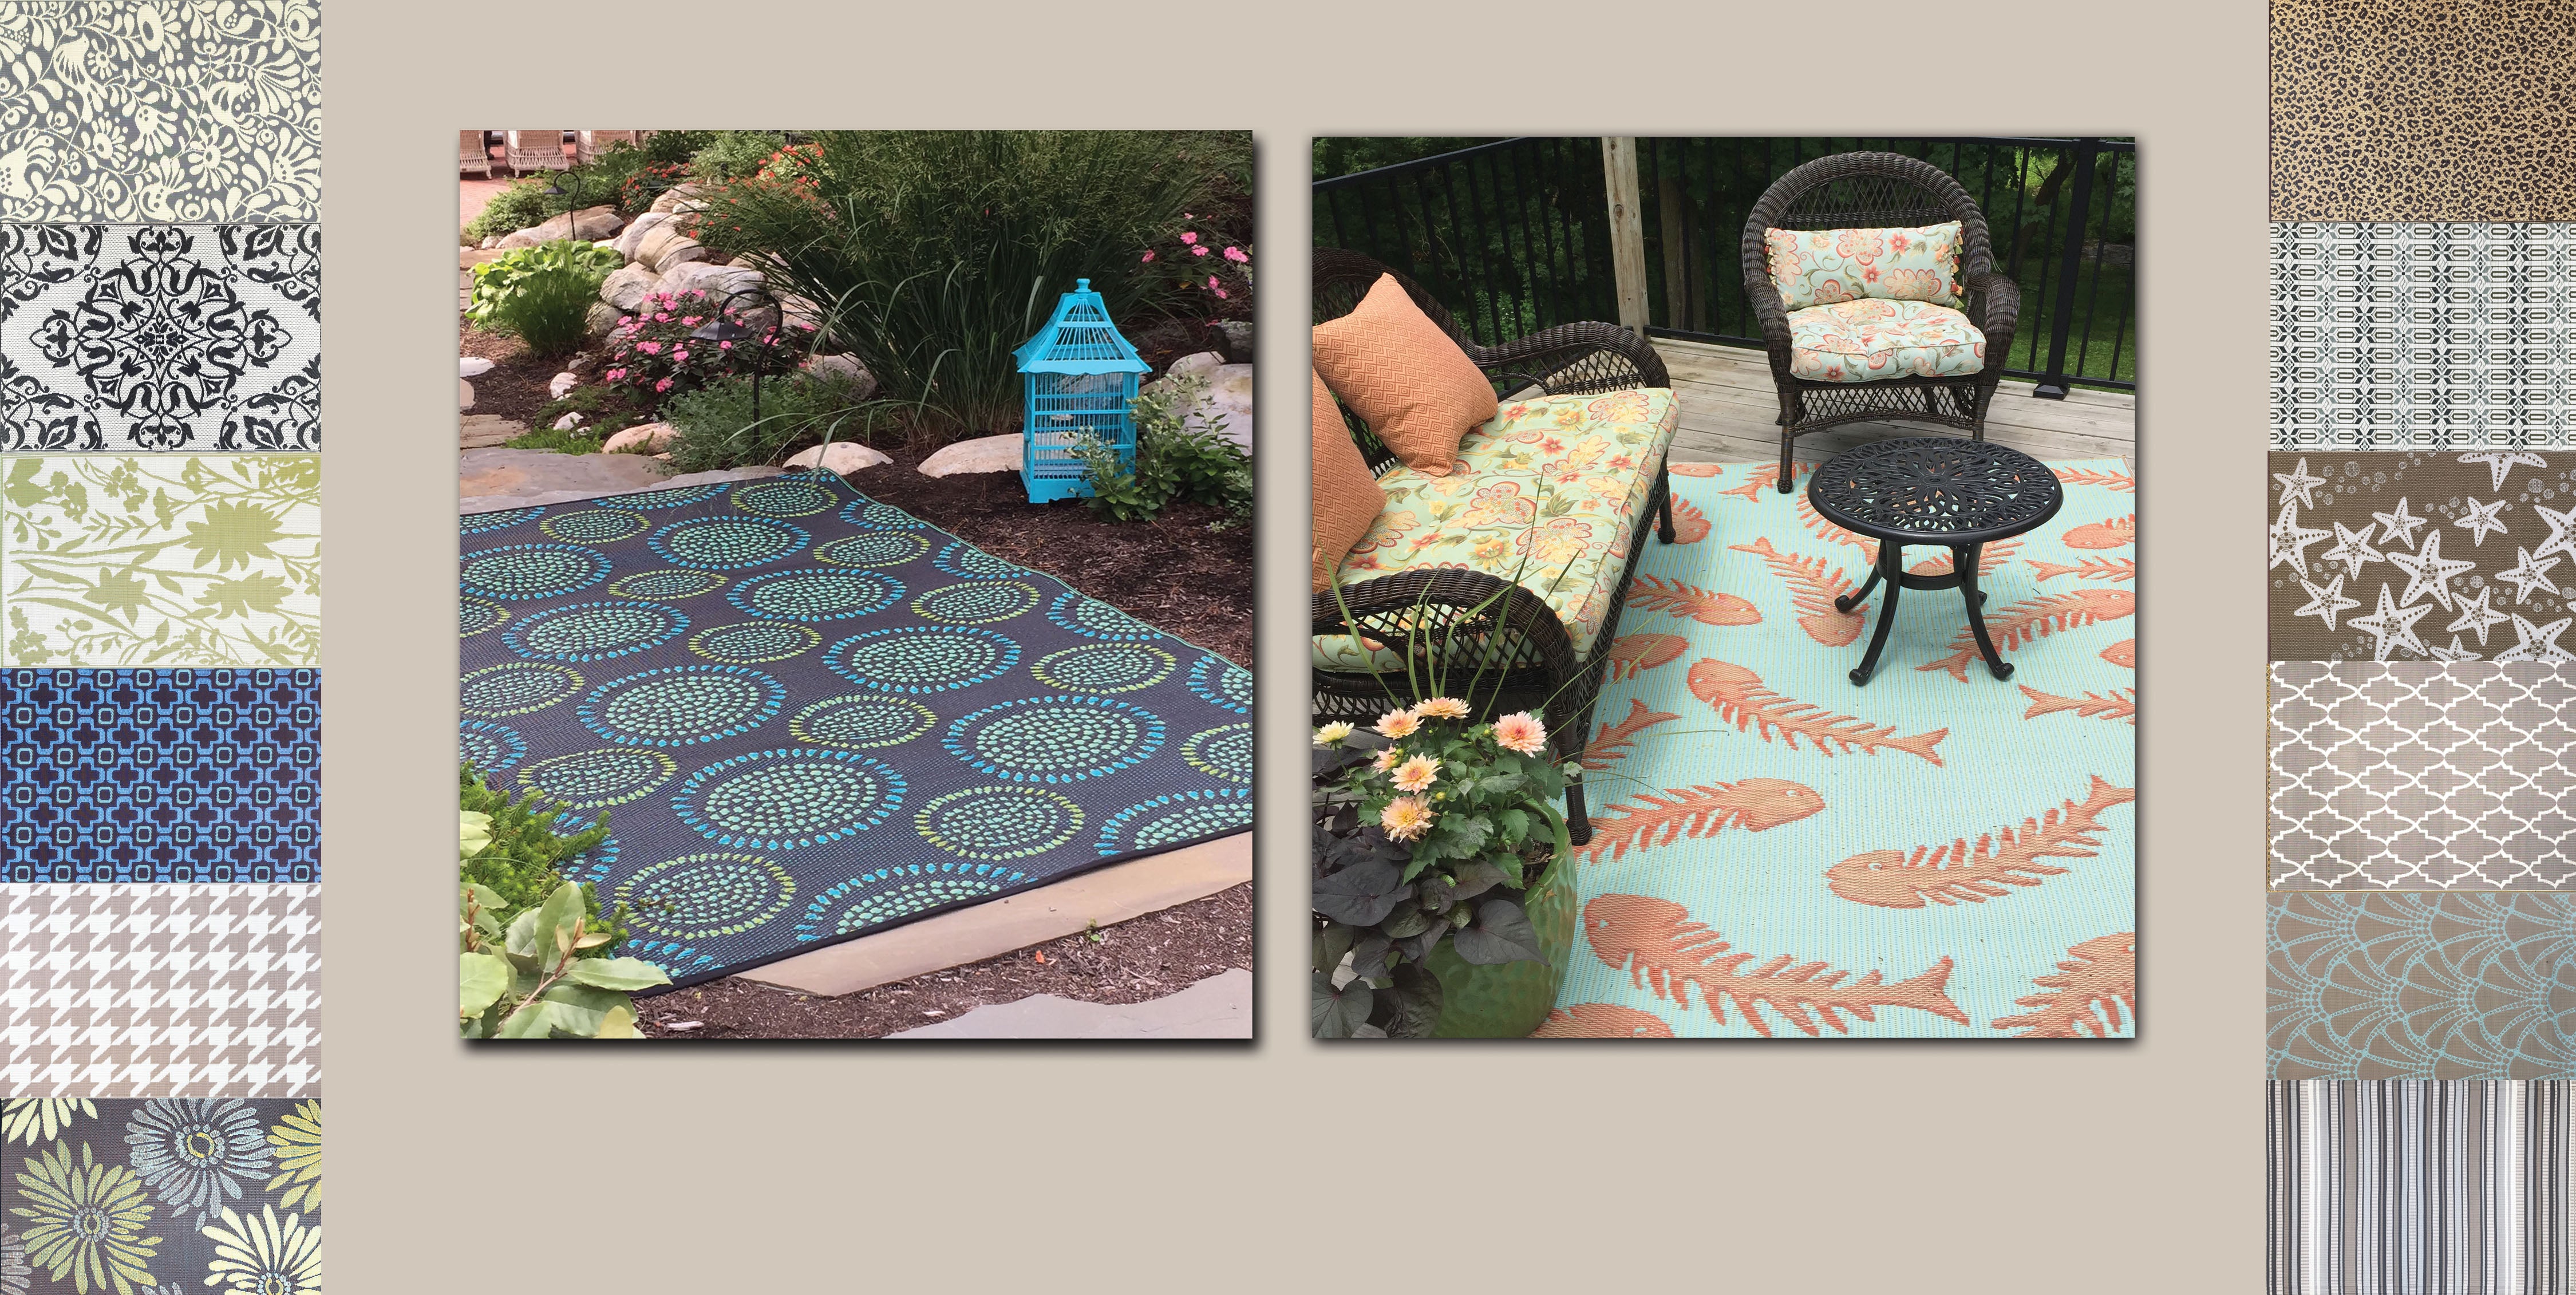 Mad Mats Outdoor Carpets from Recycled Plastics by Mariachi Imports Inc. -  Rug News and Design Magazine